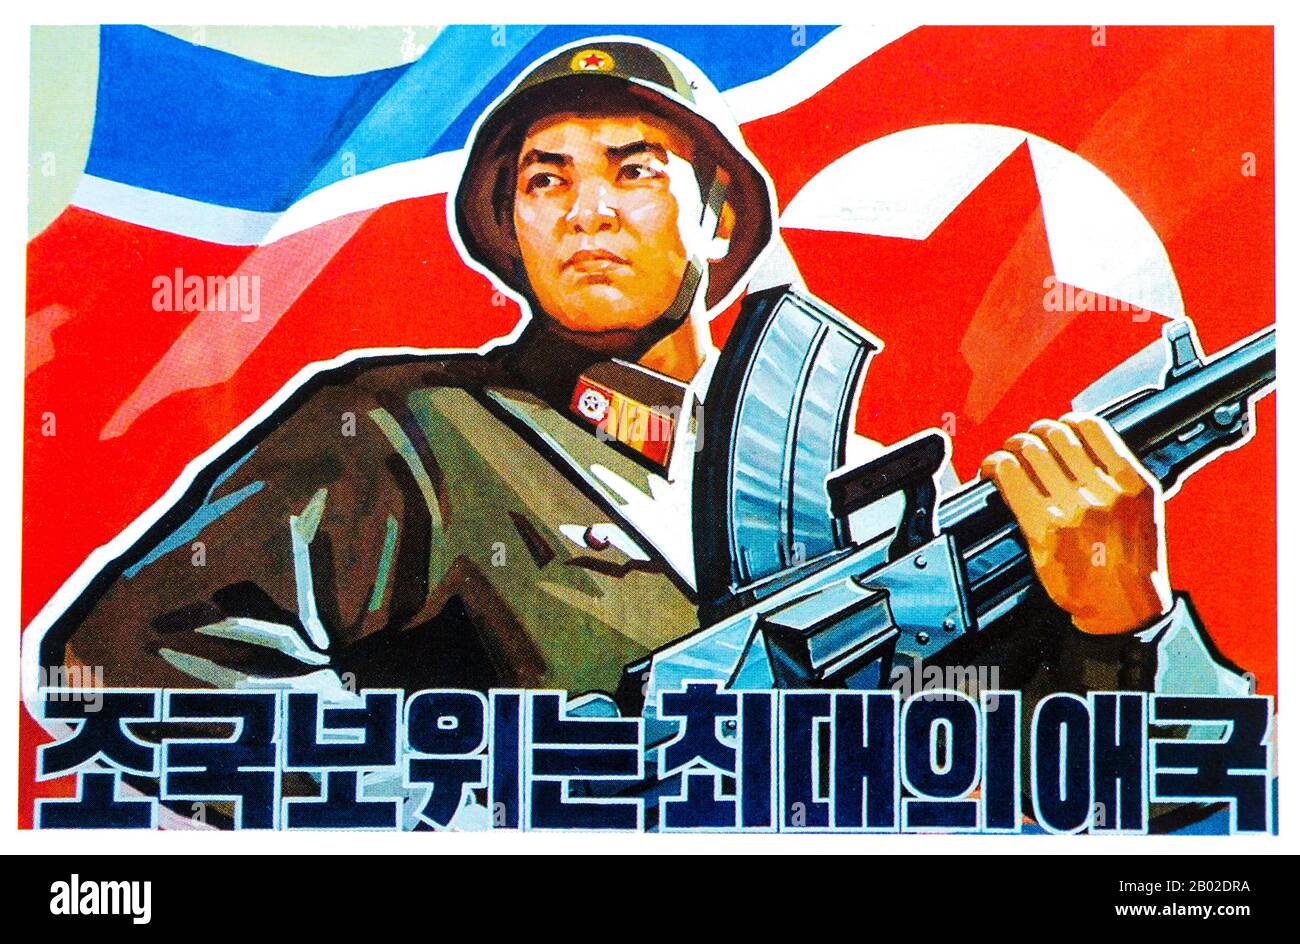 The Korean People's Army (KPA; Chosŏn'gŭl: 조선인민군; Chosŏn inmin'gun) constitutes the military forces of North Korea. Kim Jong-un is the Supreme Commander of the Korean People's Army and Chairman of the National Defence Commission. The KPA consists of five branches, Ground Force, the Navy, the Air Force, the Strategic Rocket Forces, and the Special Operation Force. Also, the Worker-Peasant Red Guards come under control of the KPA.  In 1971, Kim Il-sung directed that 'Military Foundation Day' be changed from 8 February to 25 April, the nominal day of establishment of his anti-Japanese guerrilla a Stock Photo